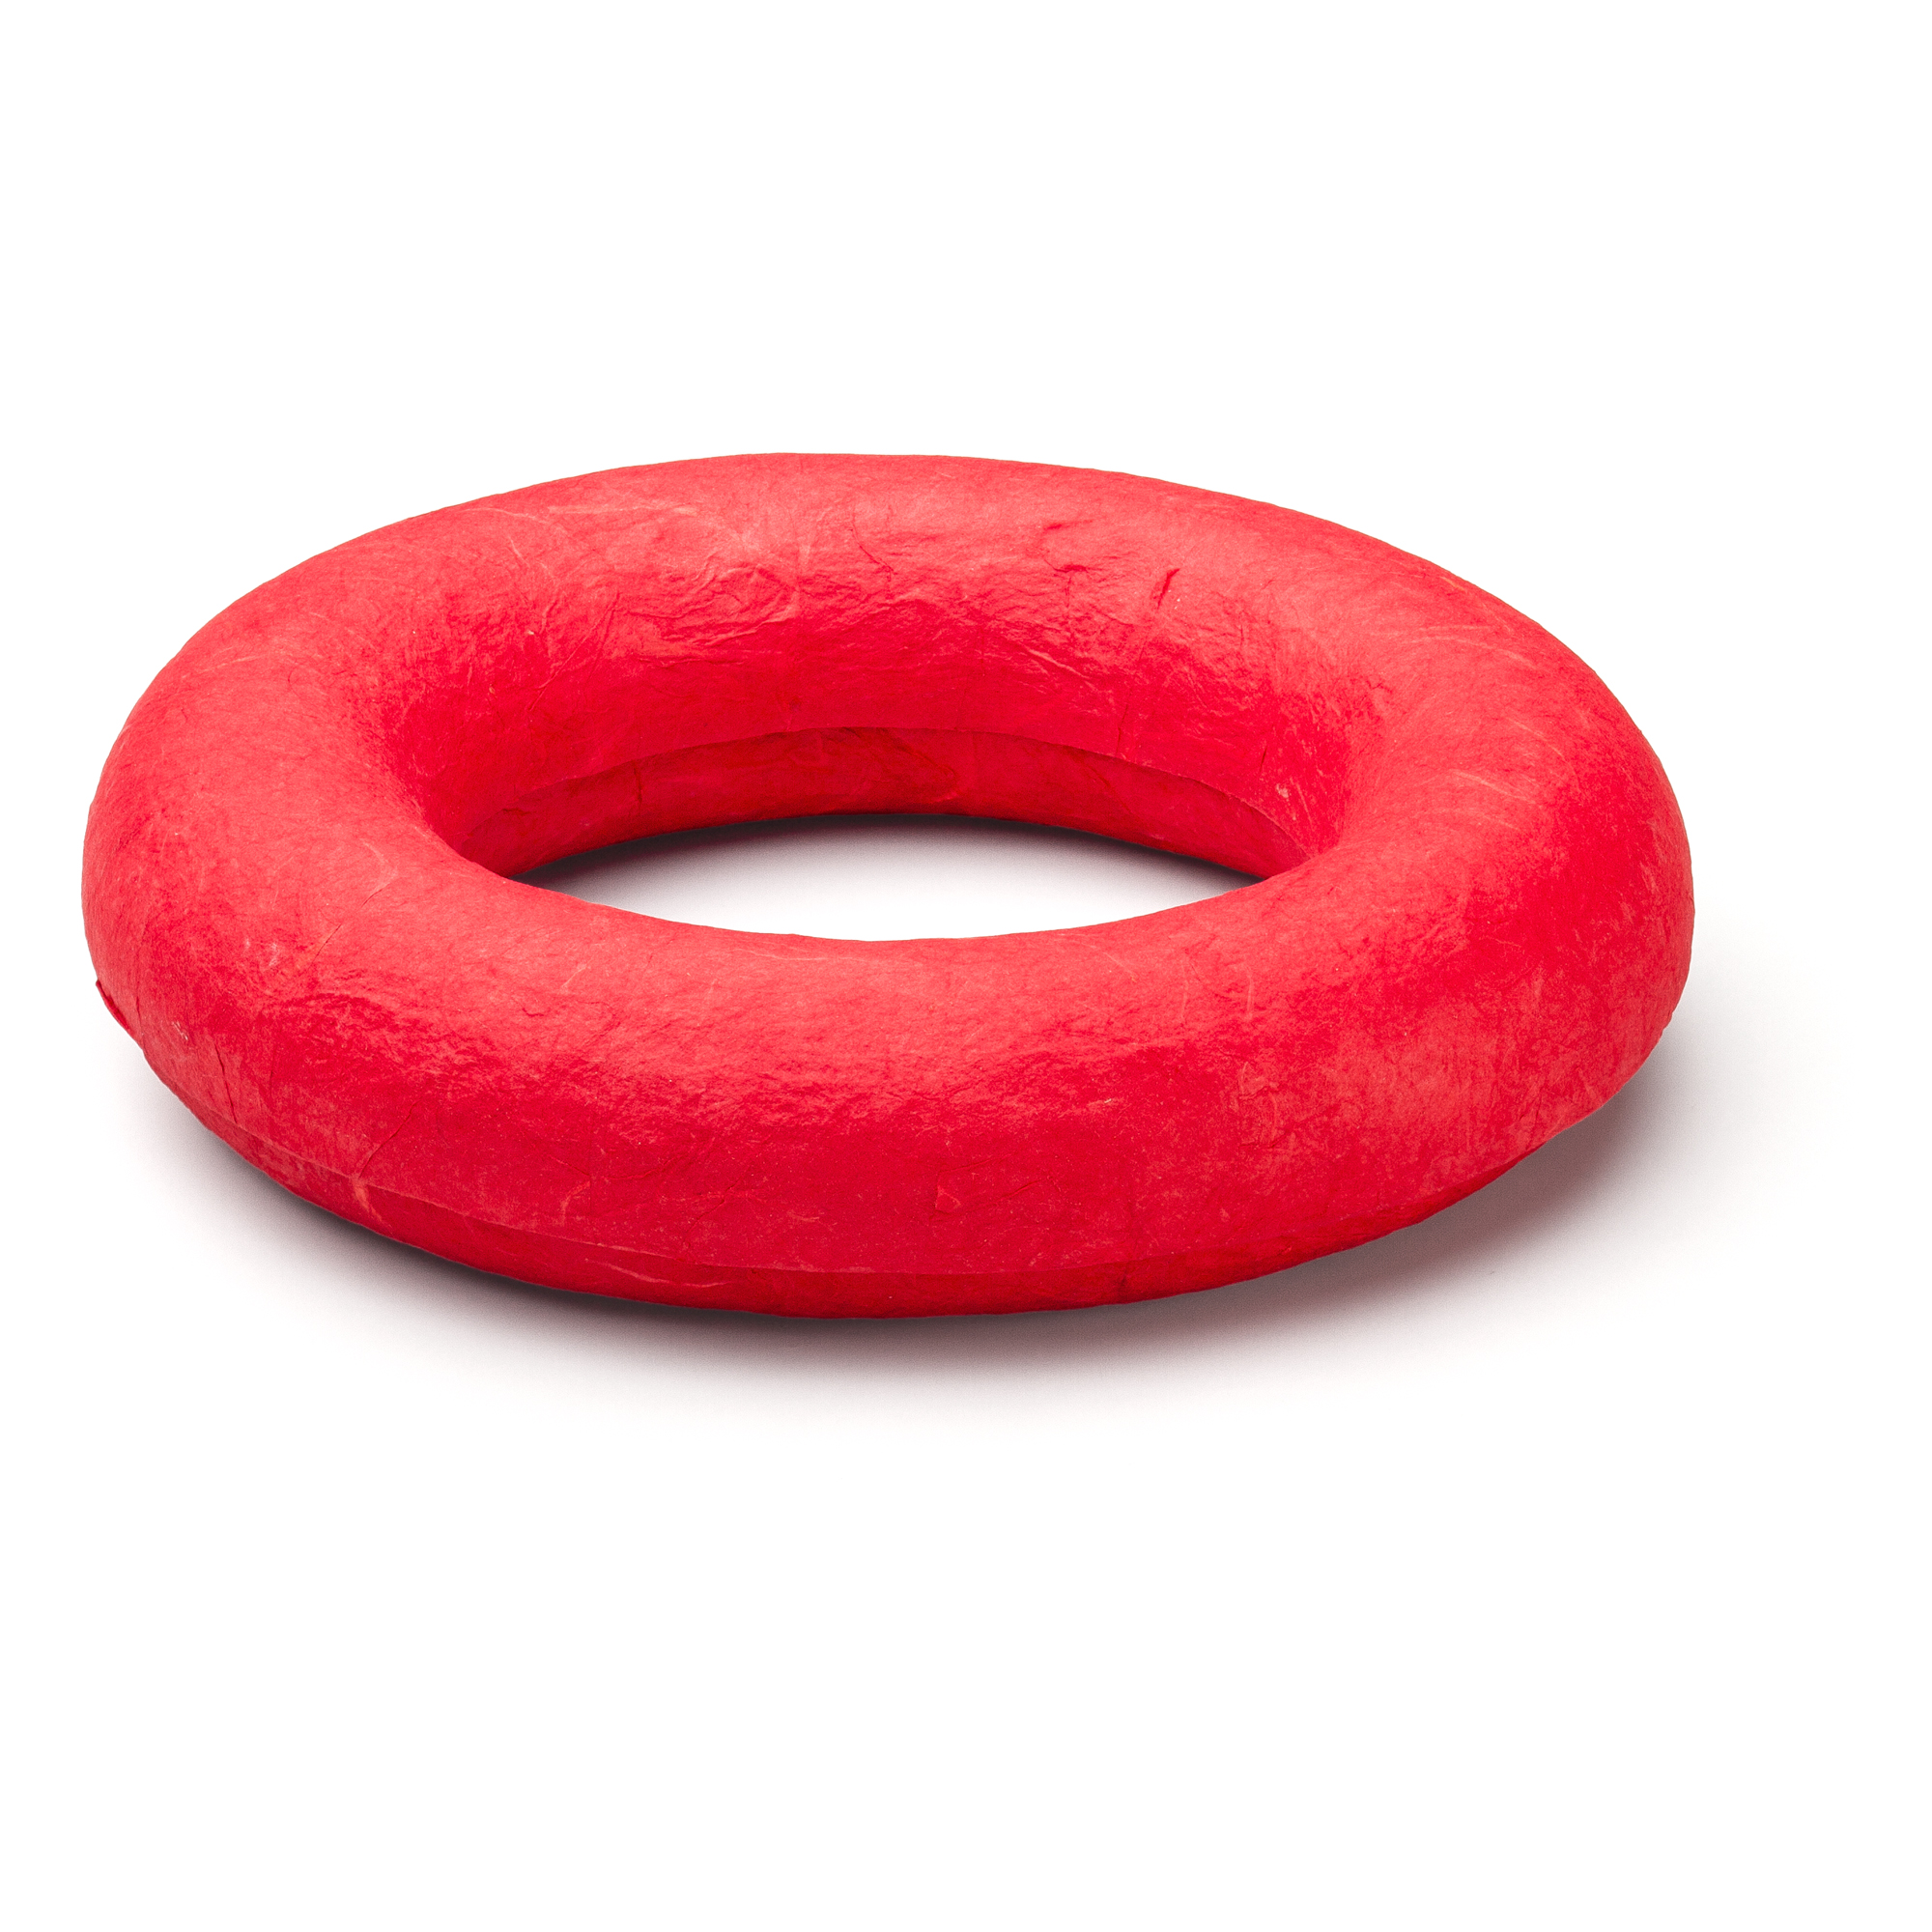 DONUT large red